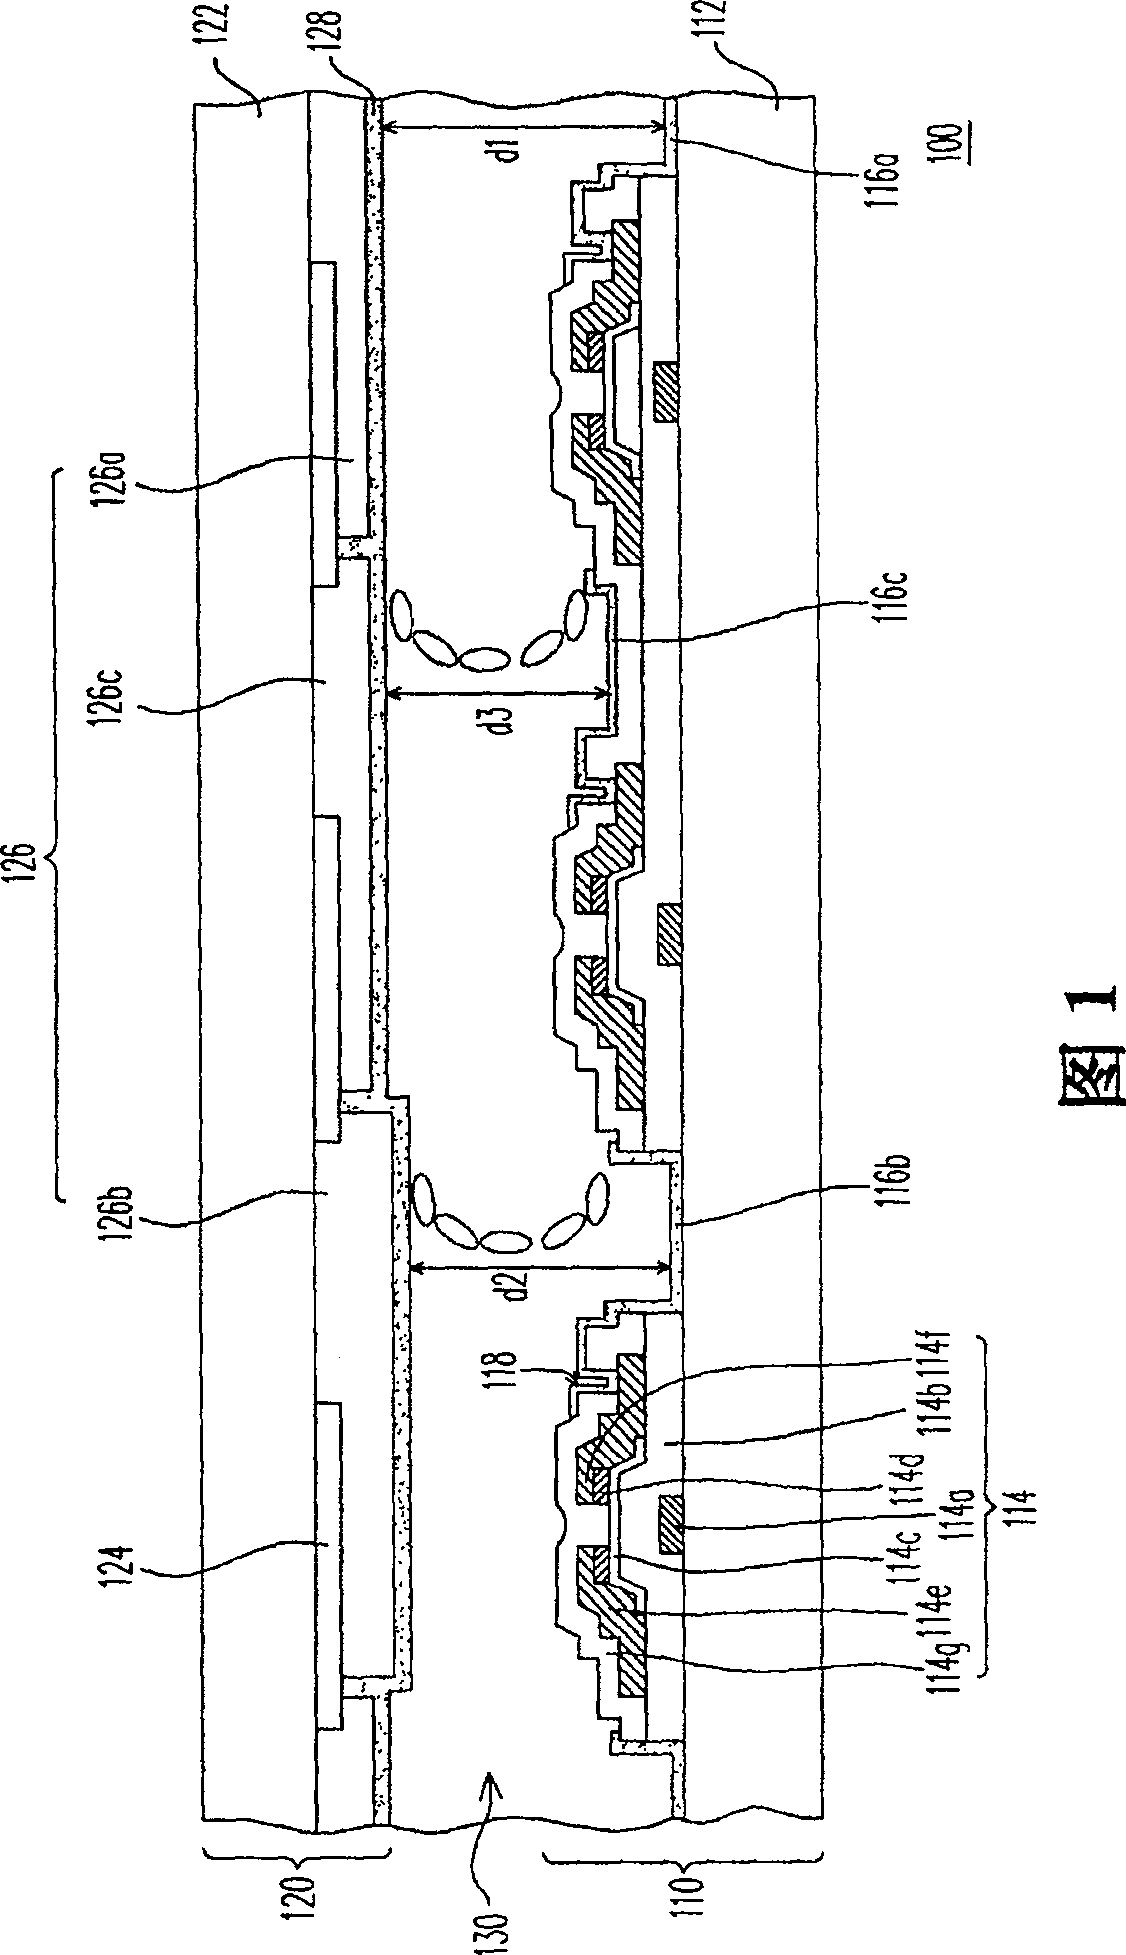 Method for producing active component array base plate